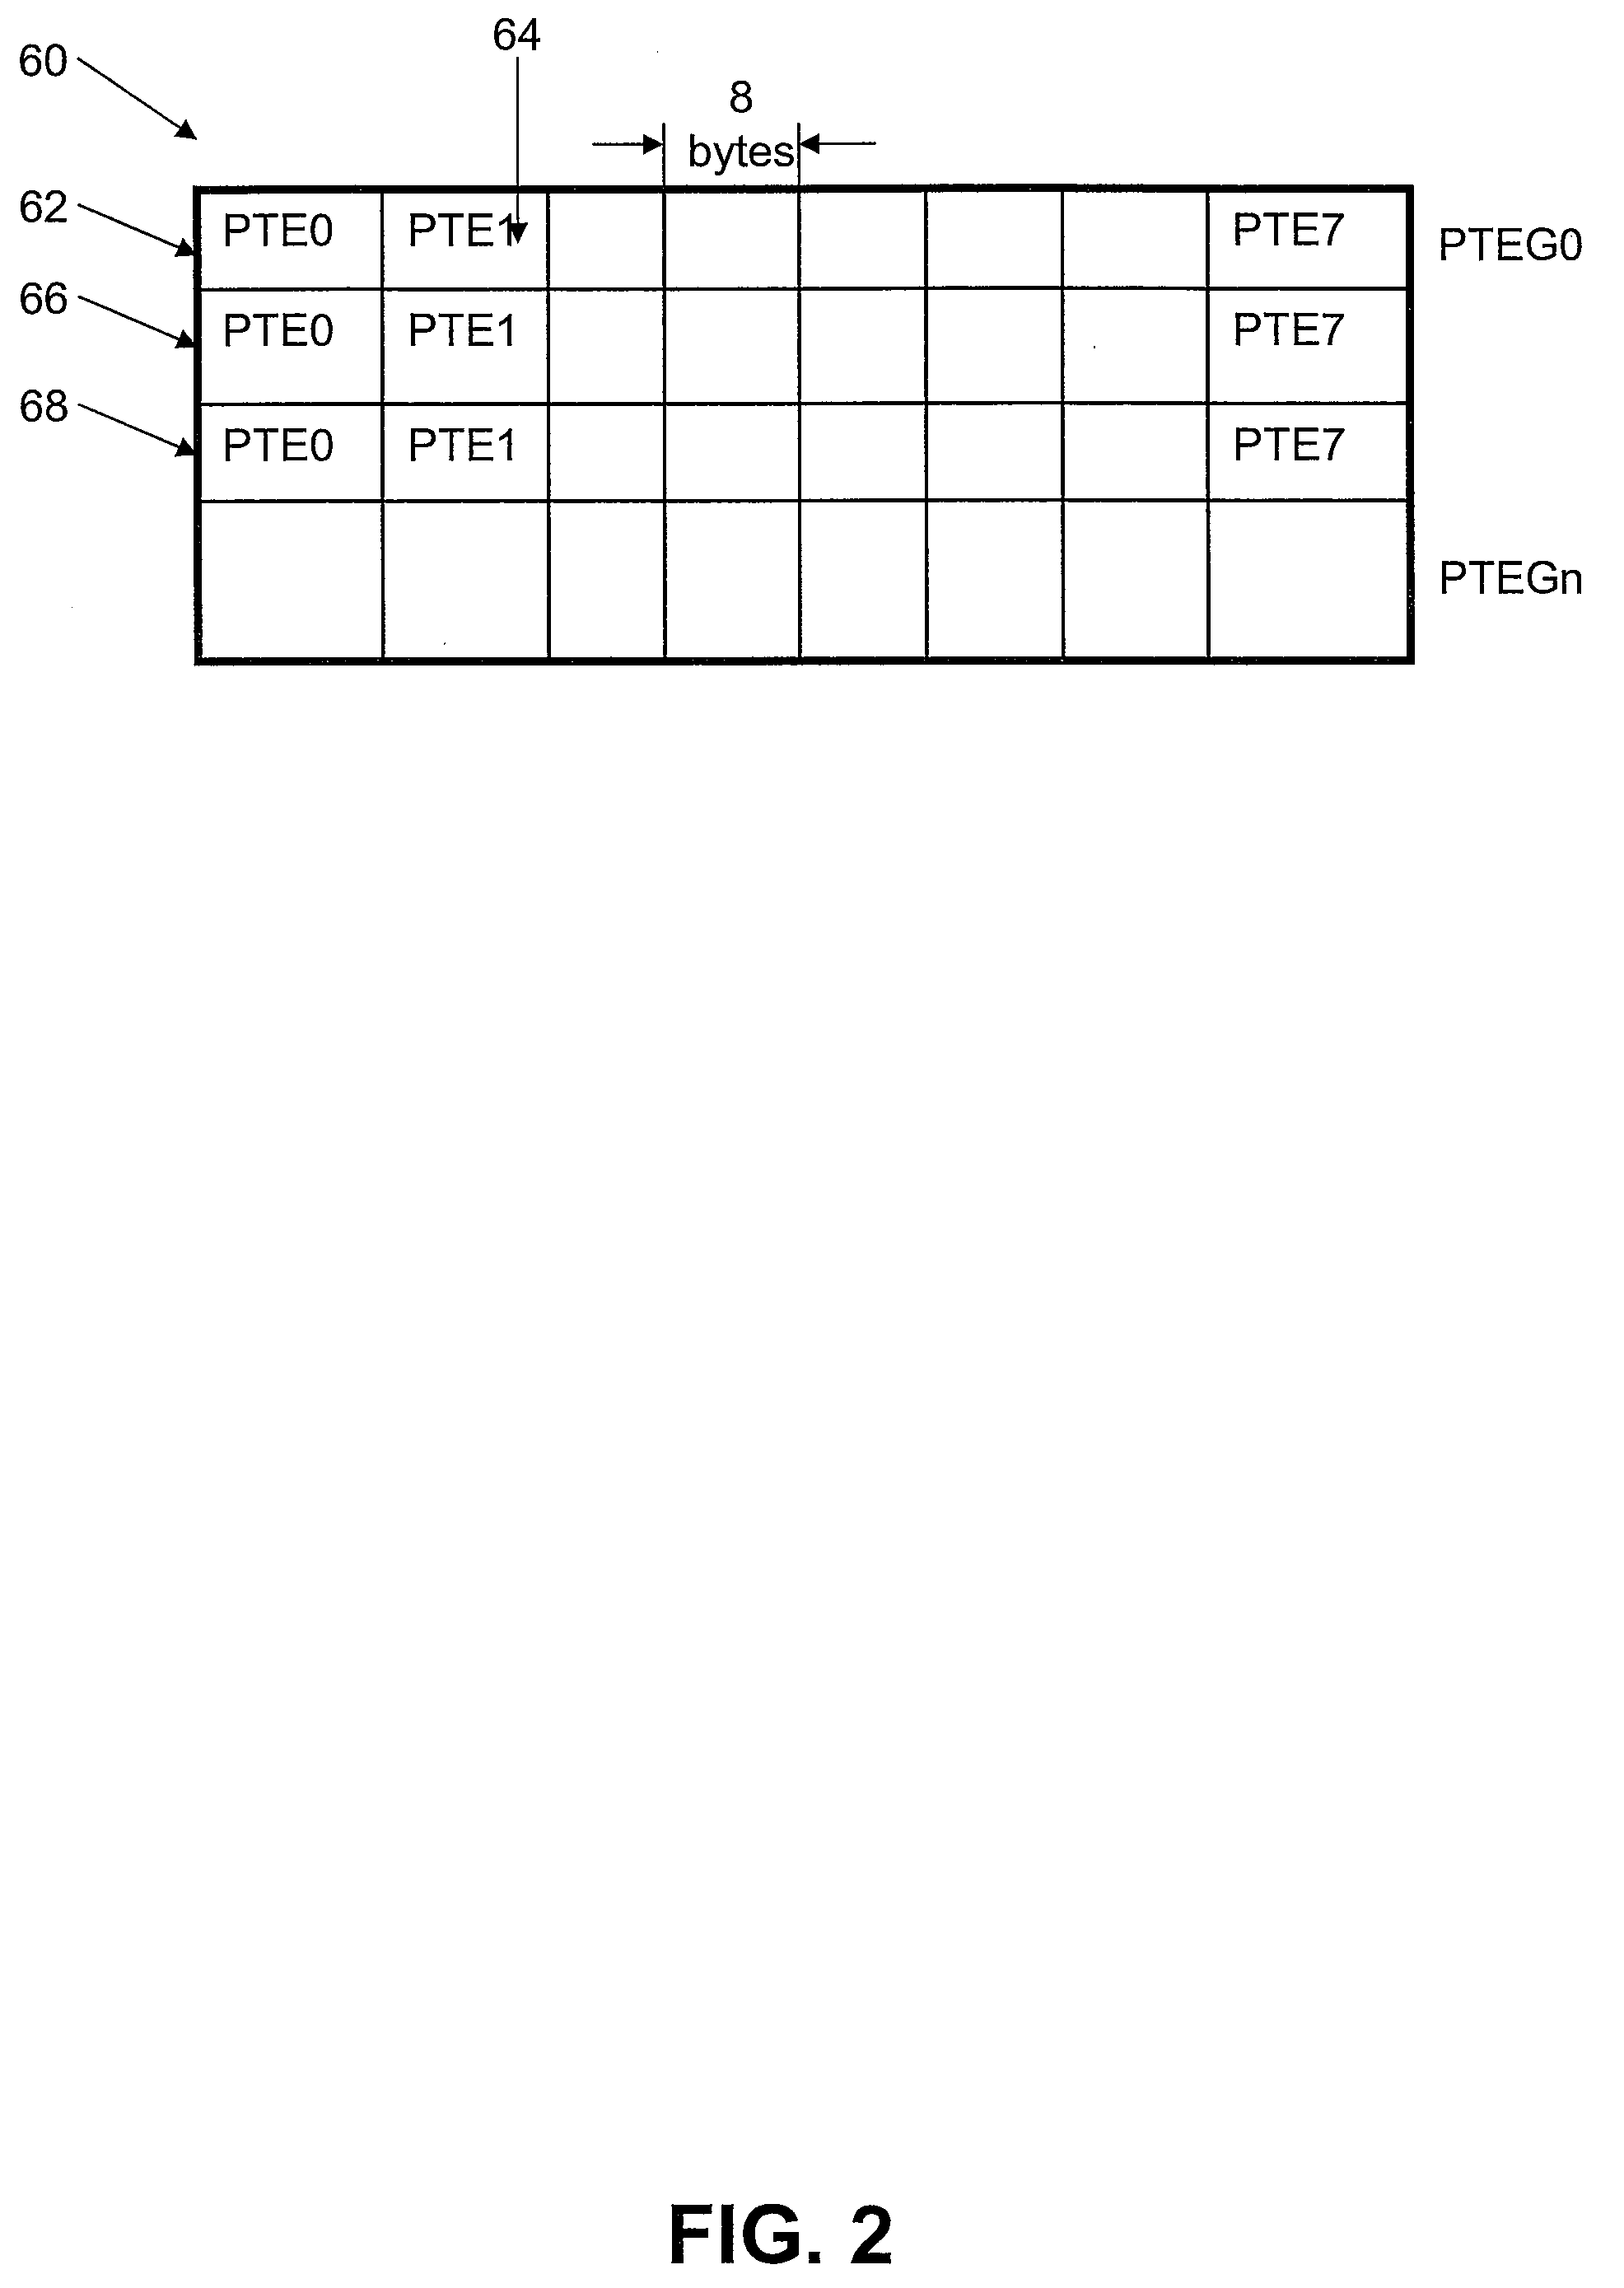 Method and System for Performance-Driven Memory Page Size Promotion